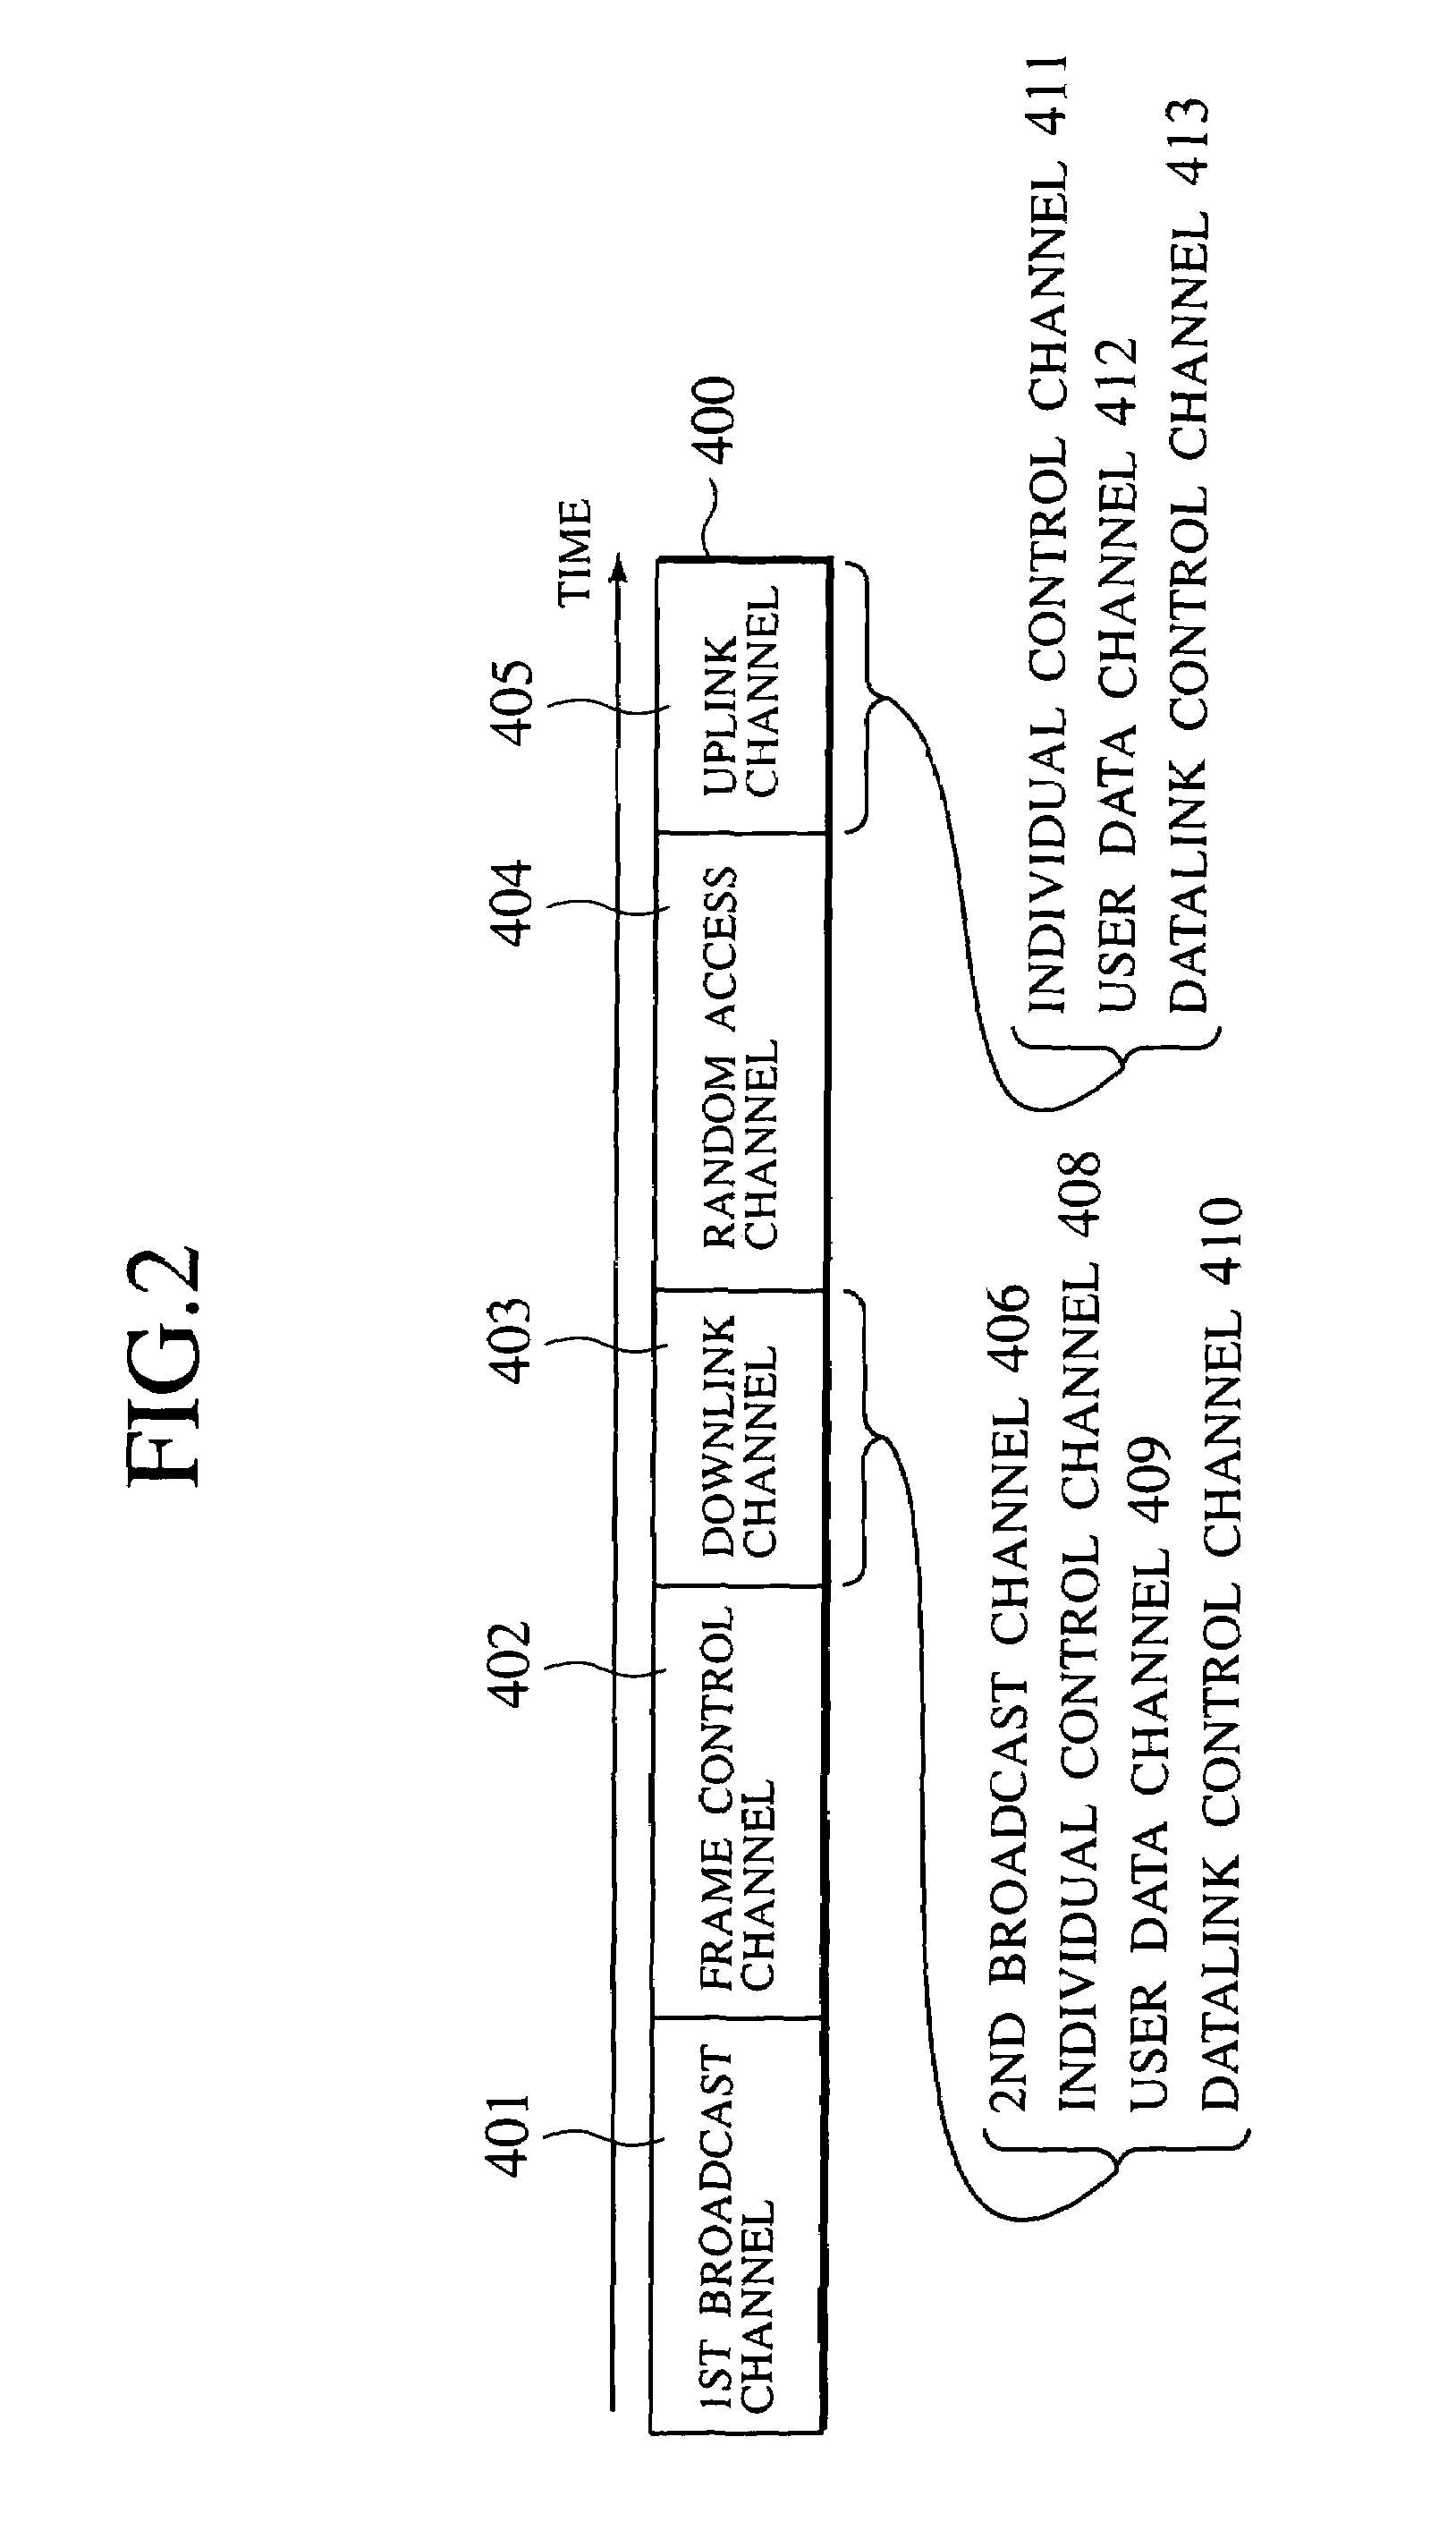 Radio communication system using point-to-point and point-to-multipoint user information communications